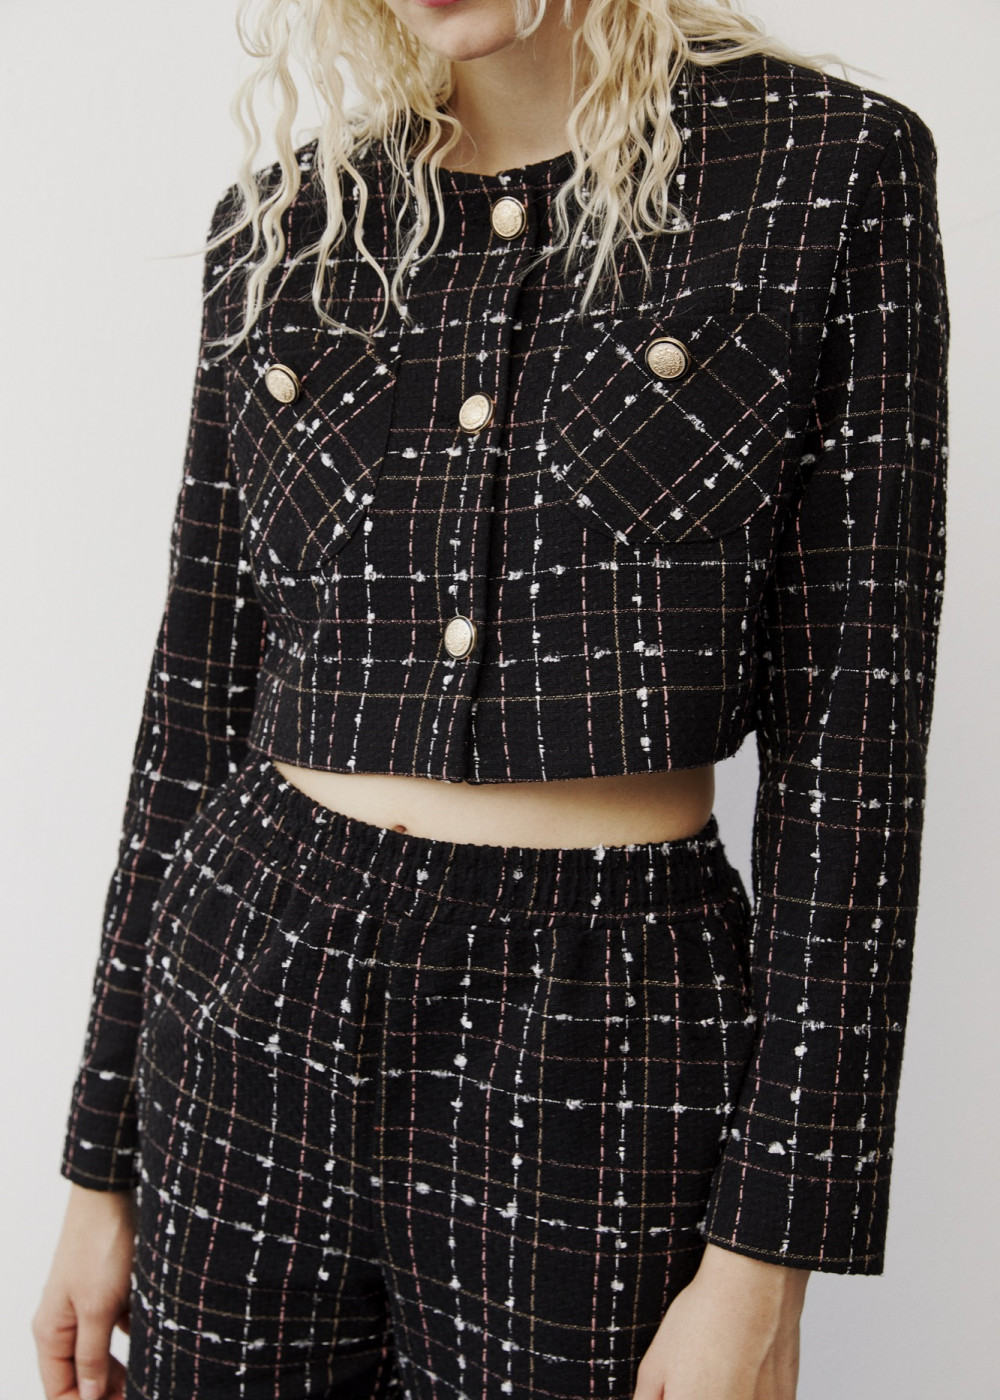 Chanel Crop Jacket - Plaid Pleated Trousers